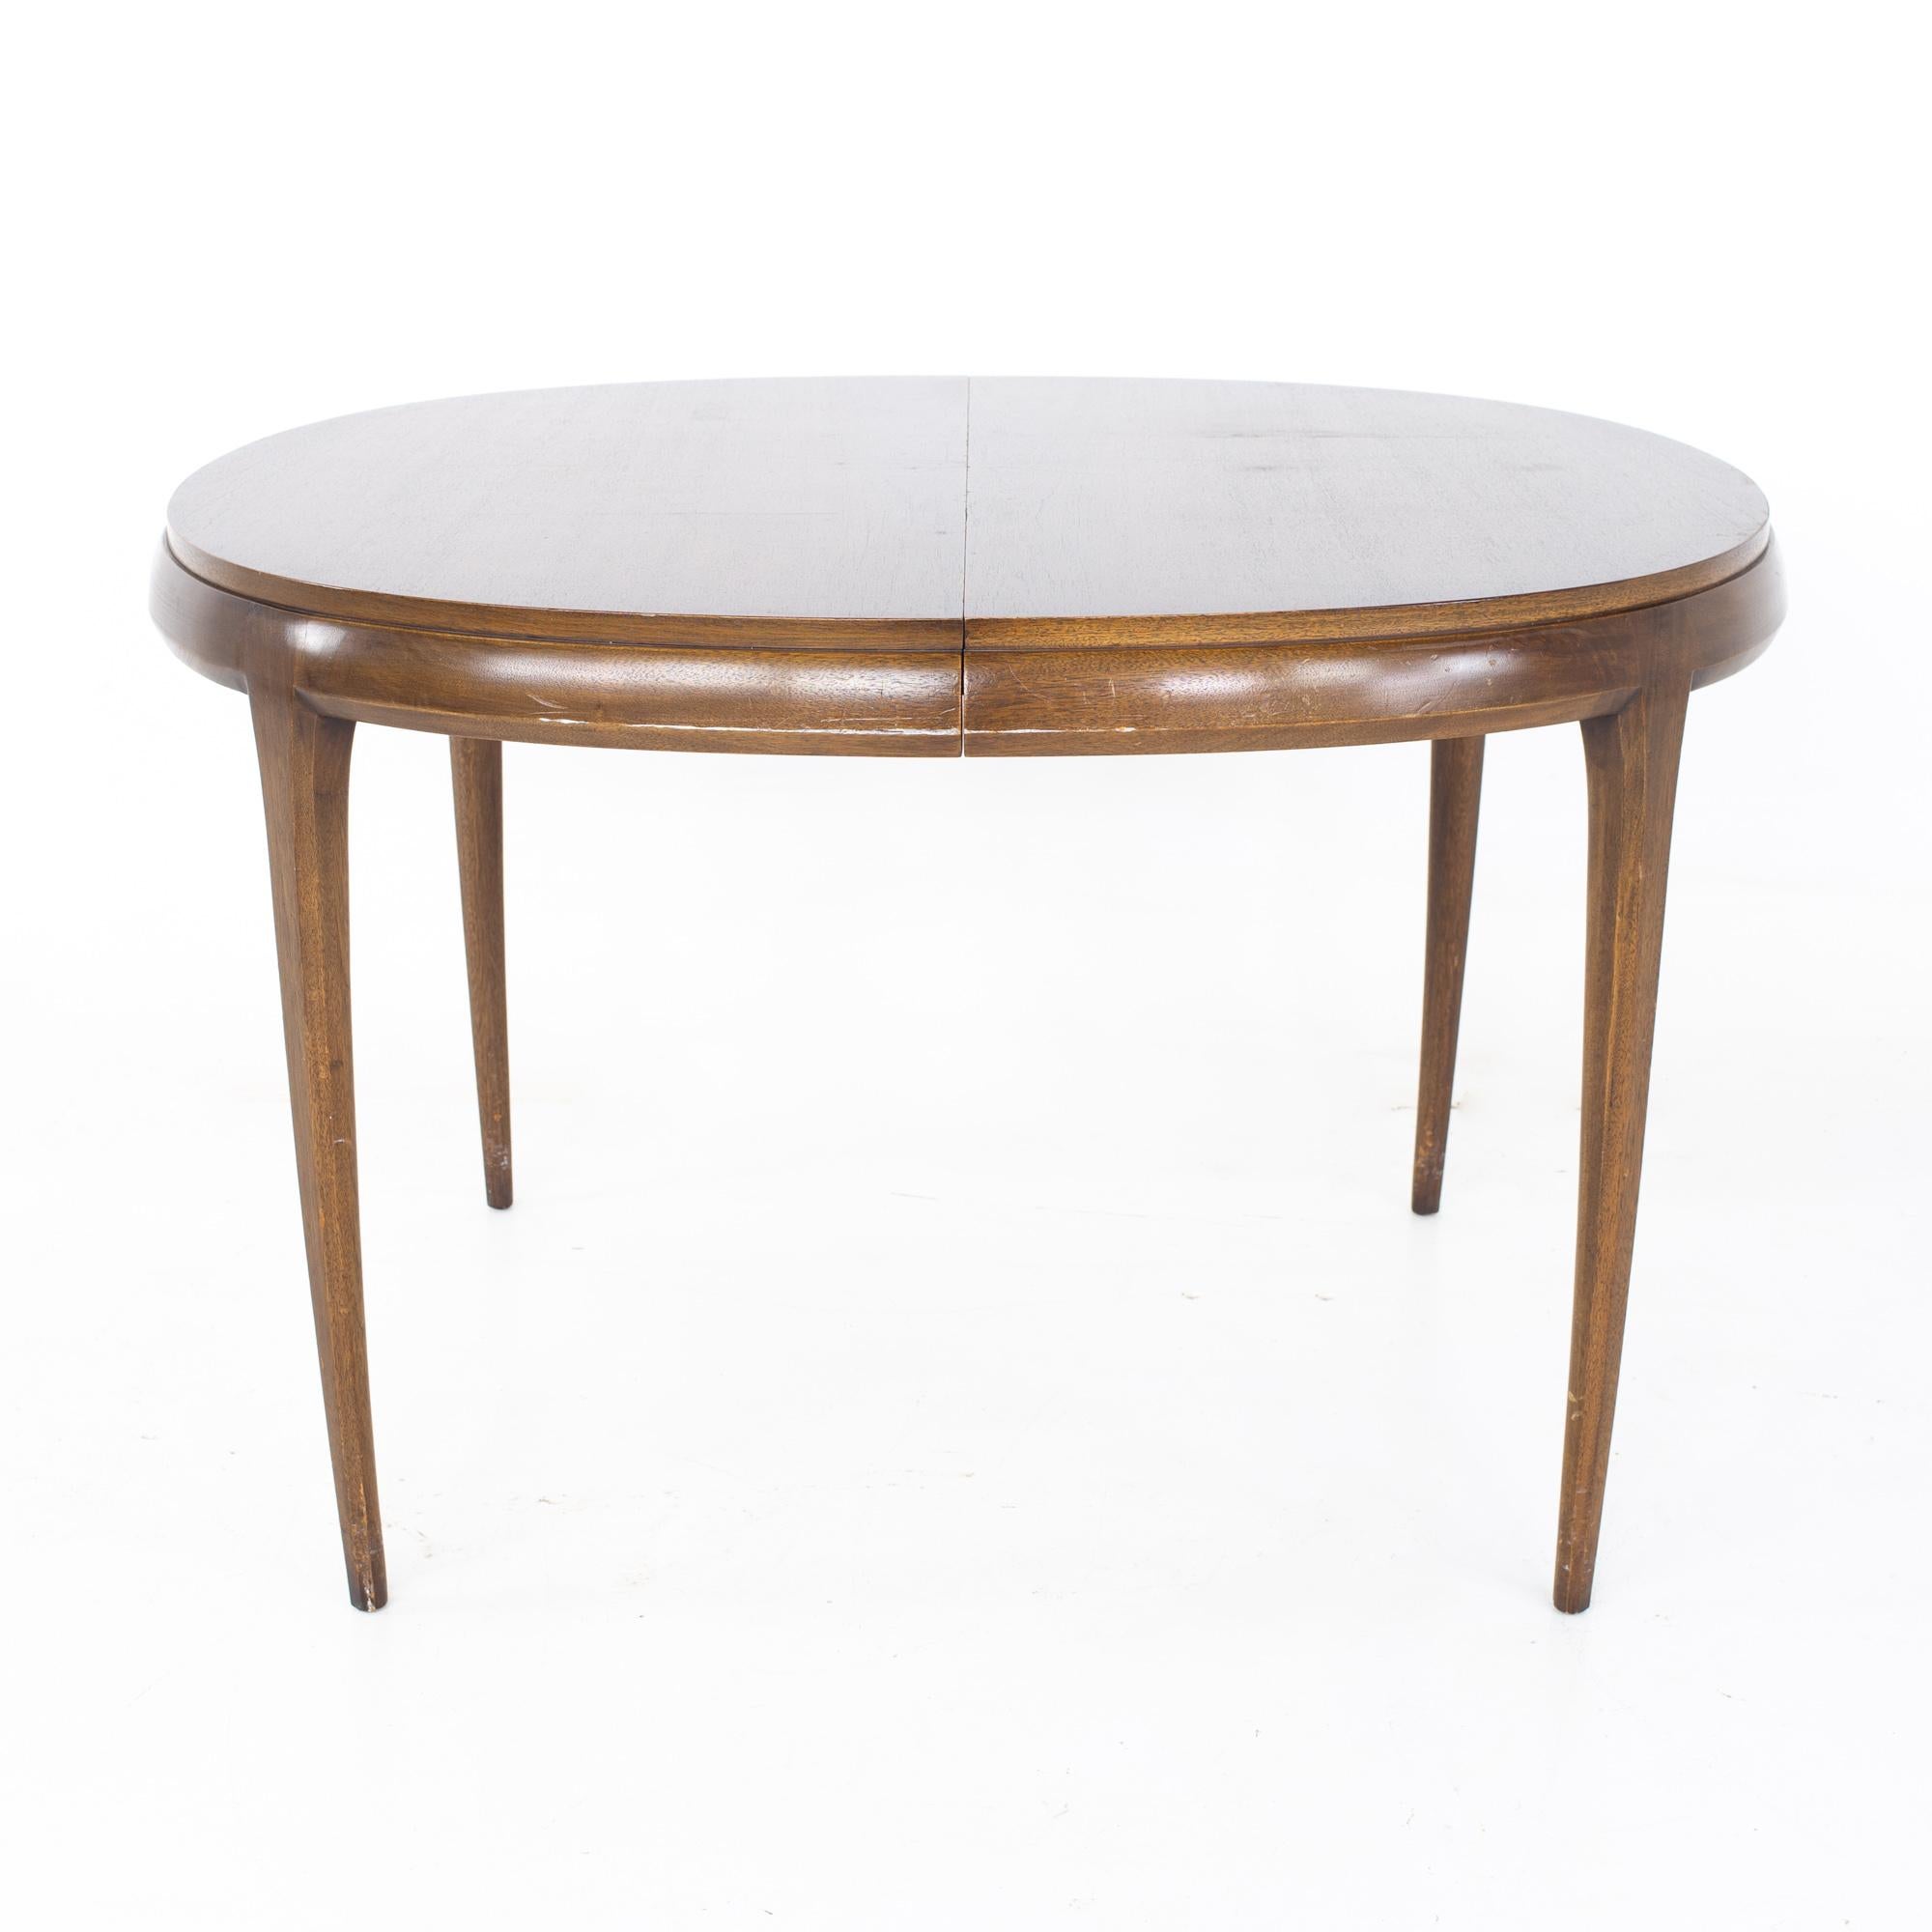 Restored Lane Rhythm style mid century walnut round oval expanding dining table

PLEASE NOTE: This table has been restored and is ready to be shipped ASAP.

The table measures: 46 wide x 42 deep x 29.5 inches high; each leaf is 18 inches wide,